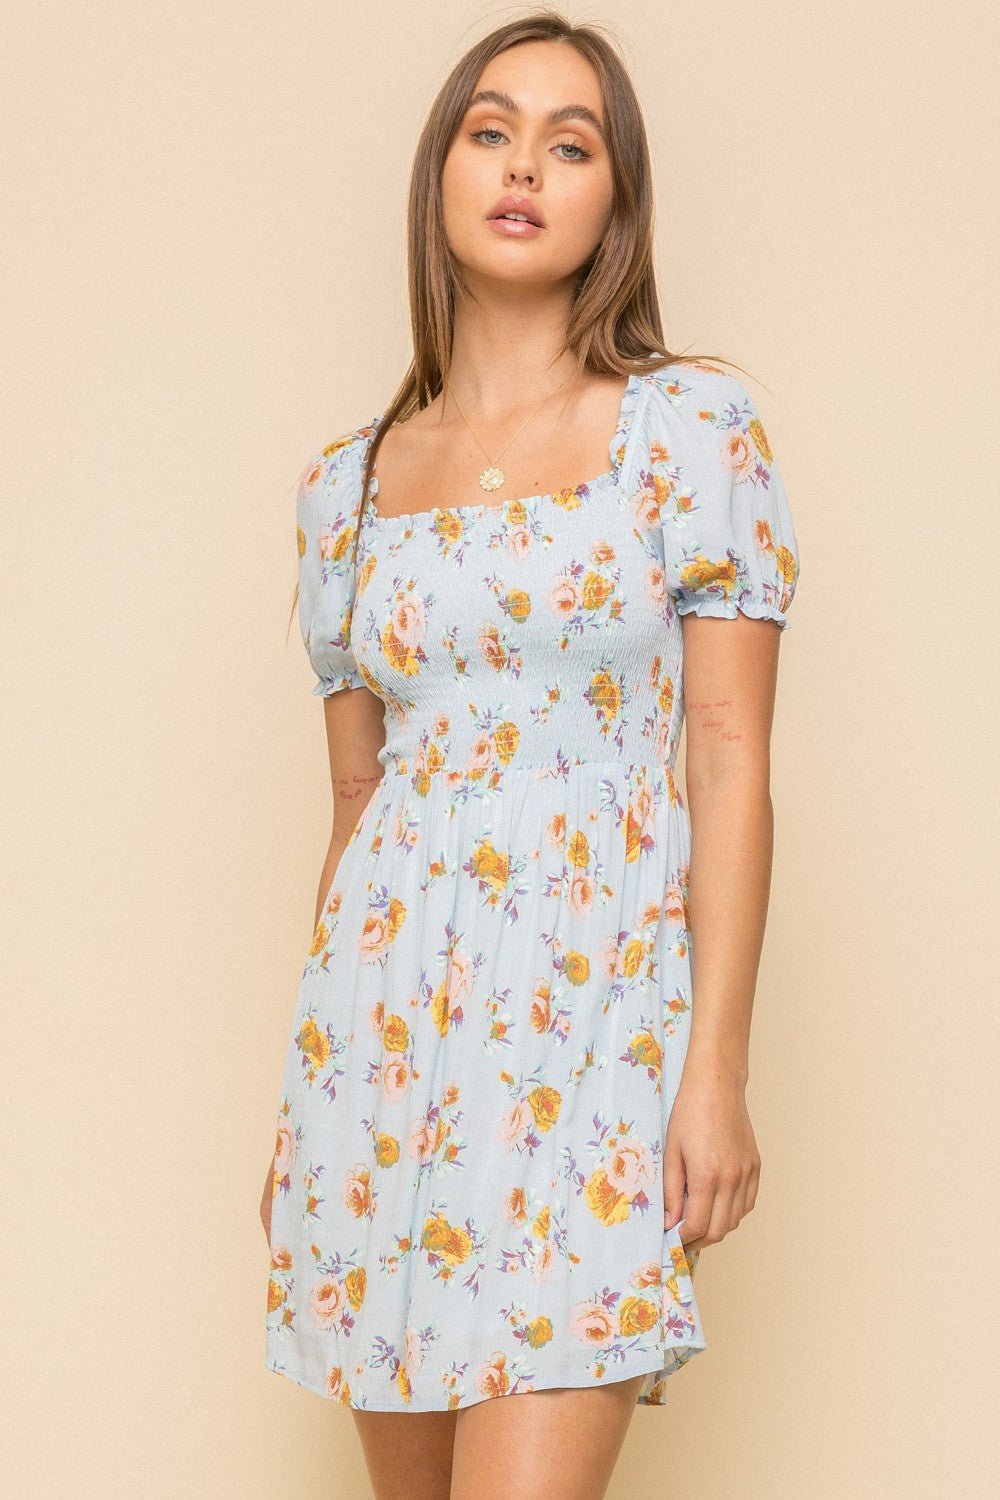 Blue Skies And Floral Gardens Dress